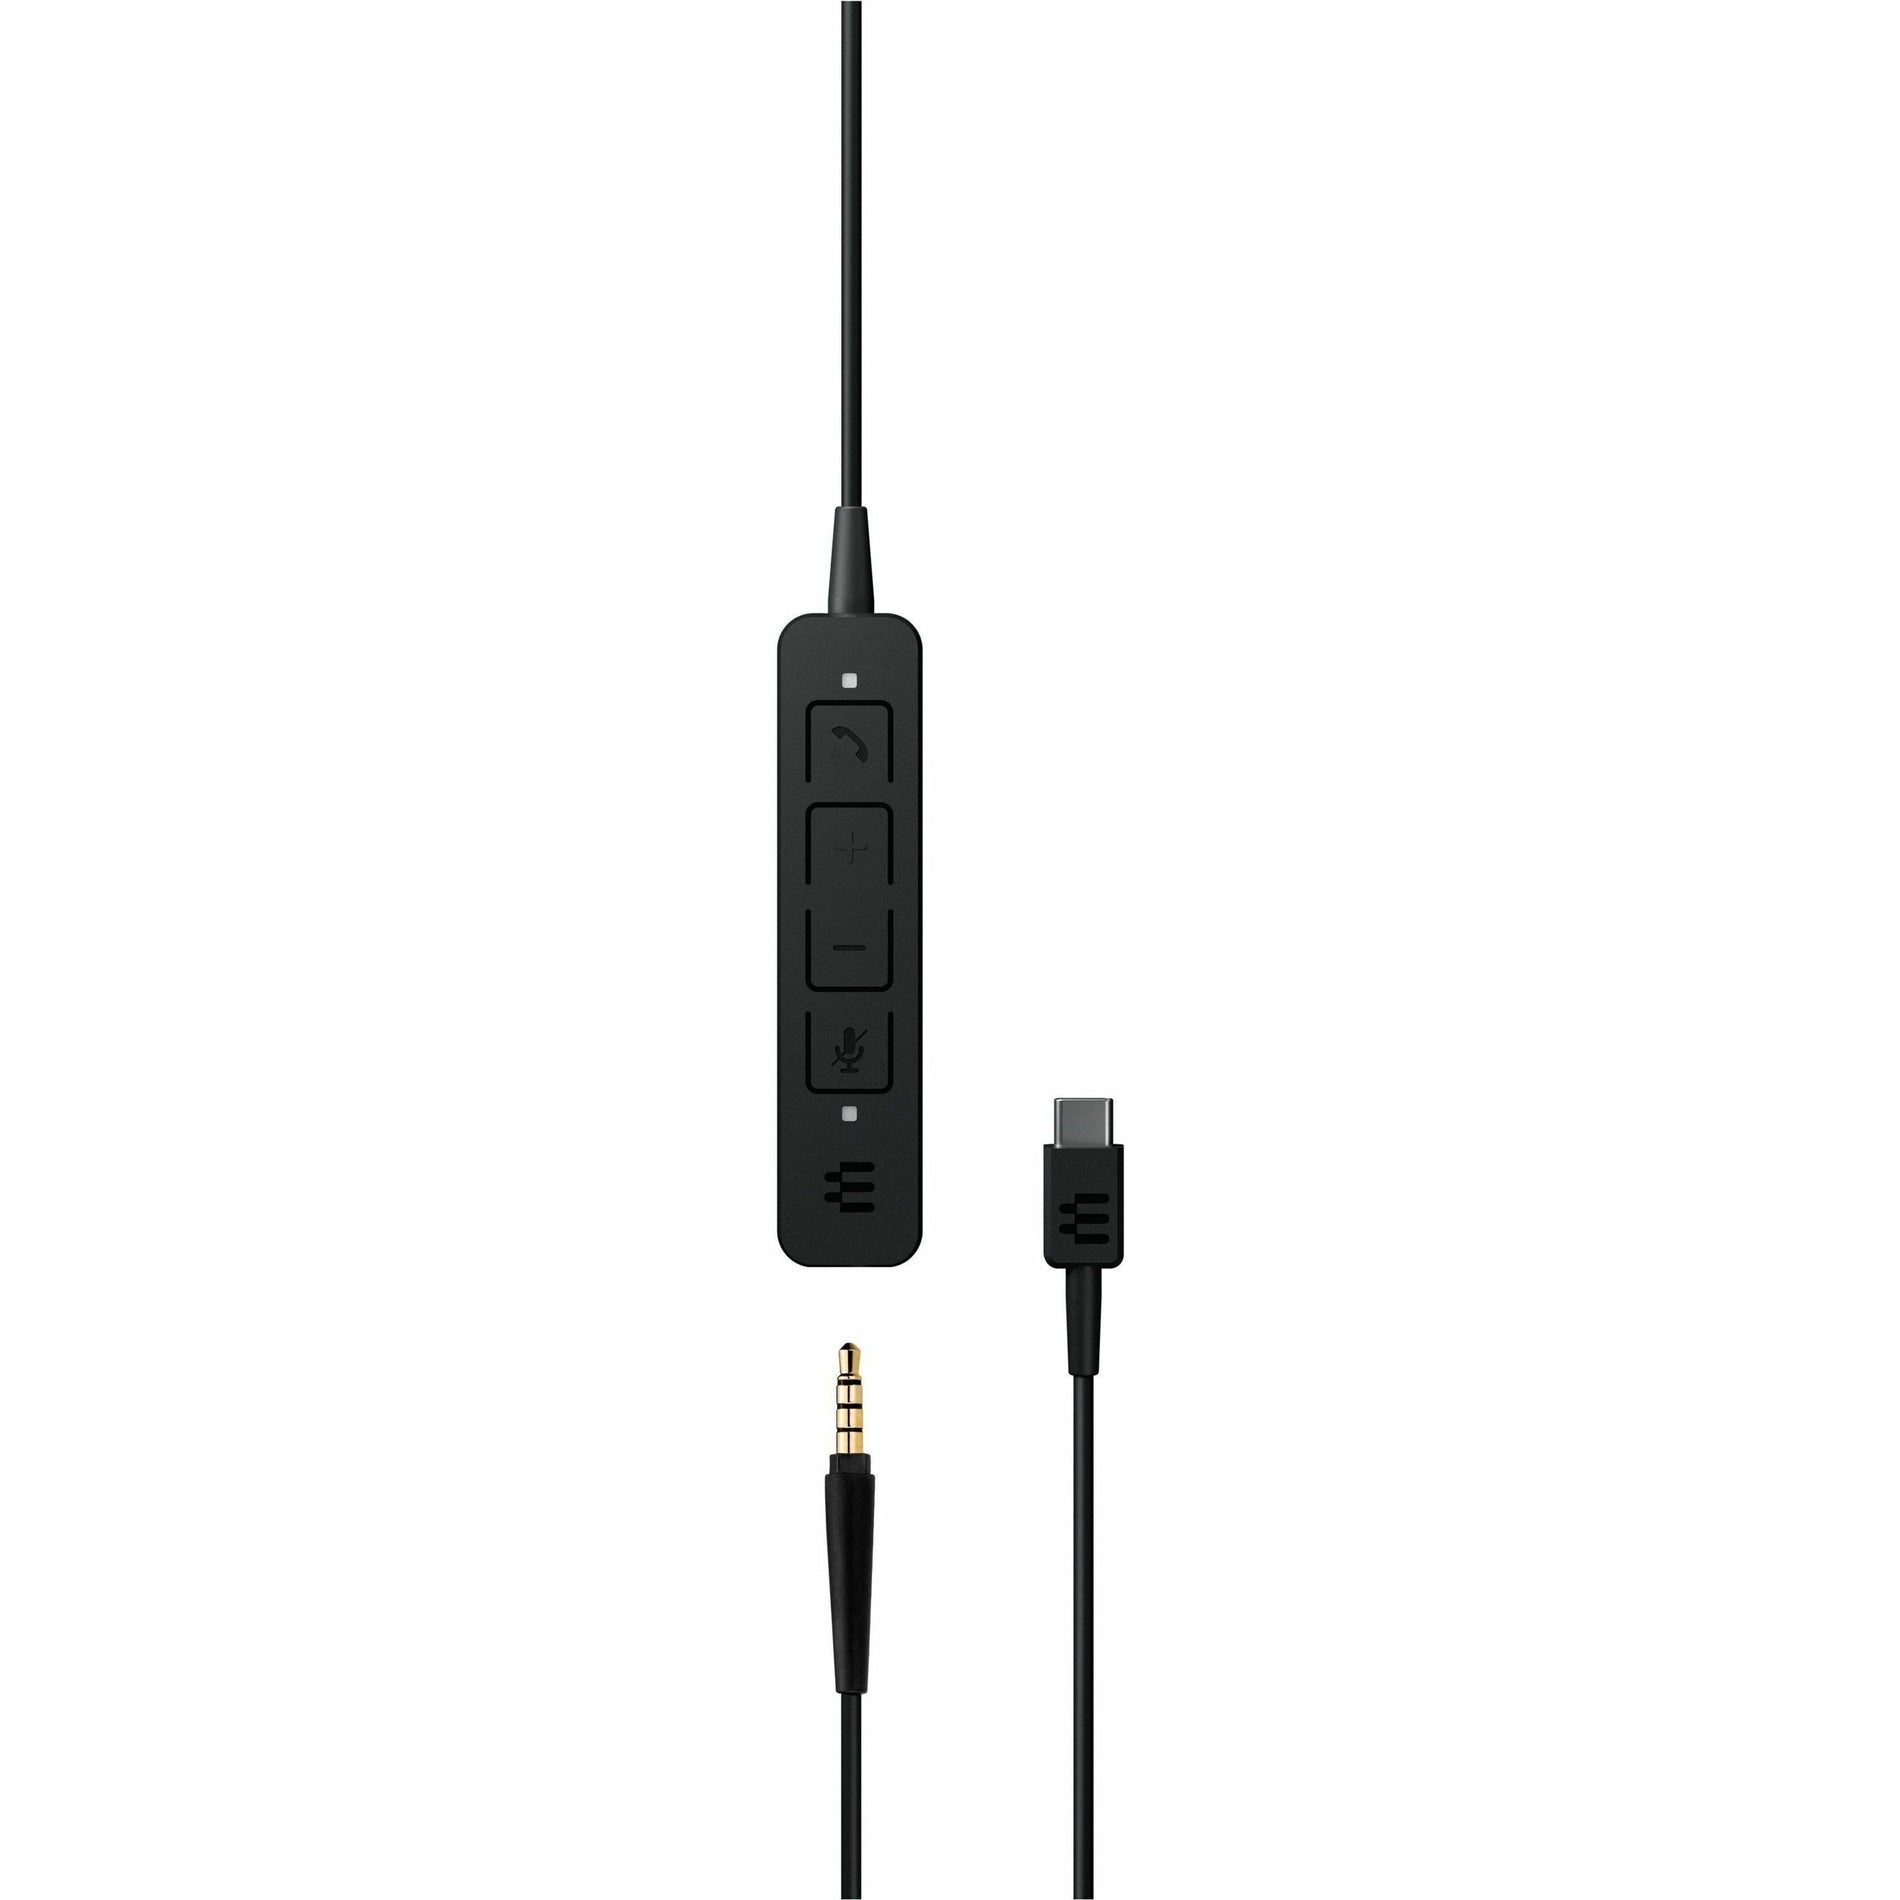 EPOS | SENNHEISER 1000920 ADAPT 165 USB-C II Headset Binaural On-ear Headset with 2 Year Warranty Integrated Microphone Mobile Devices Compatibility